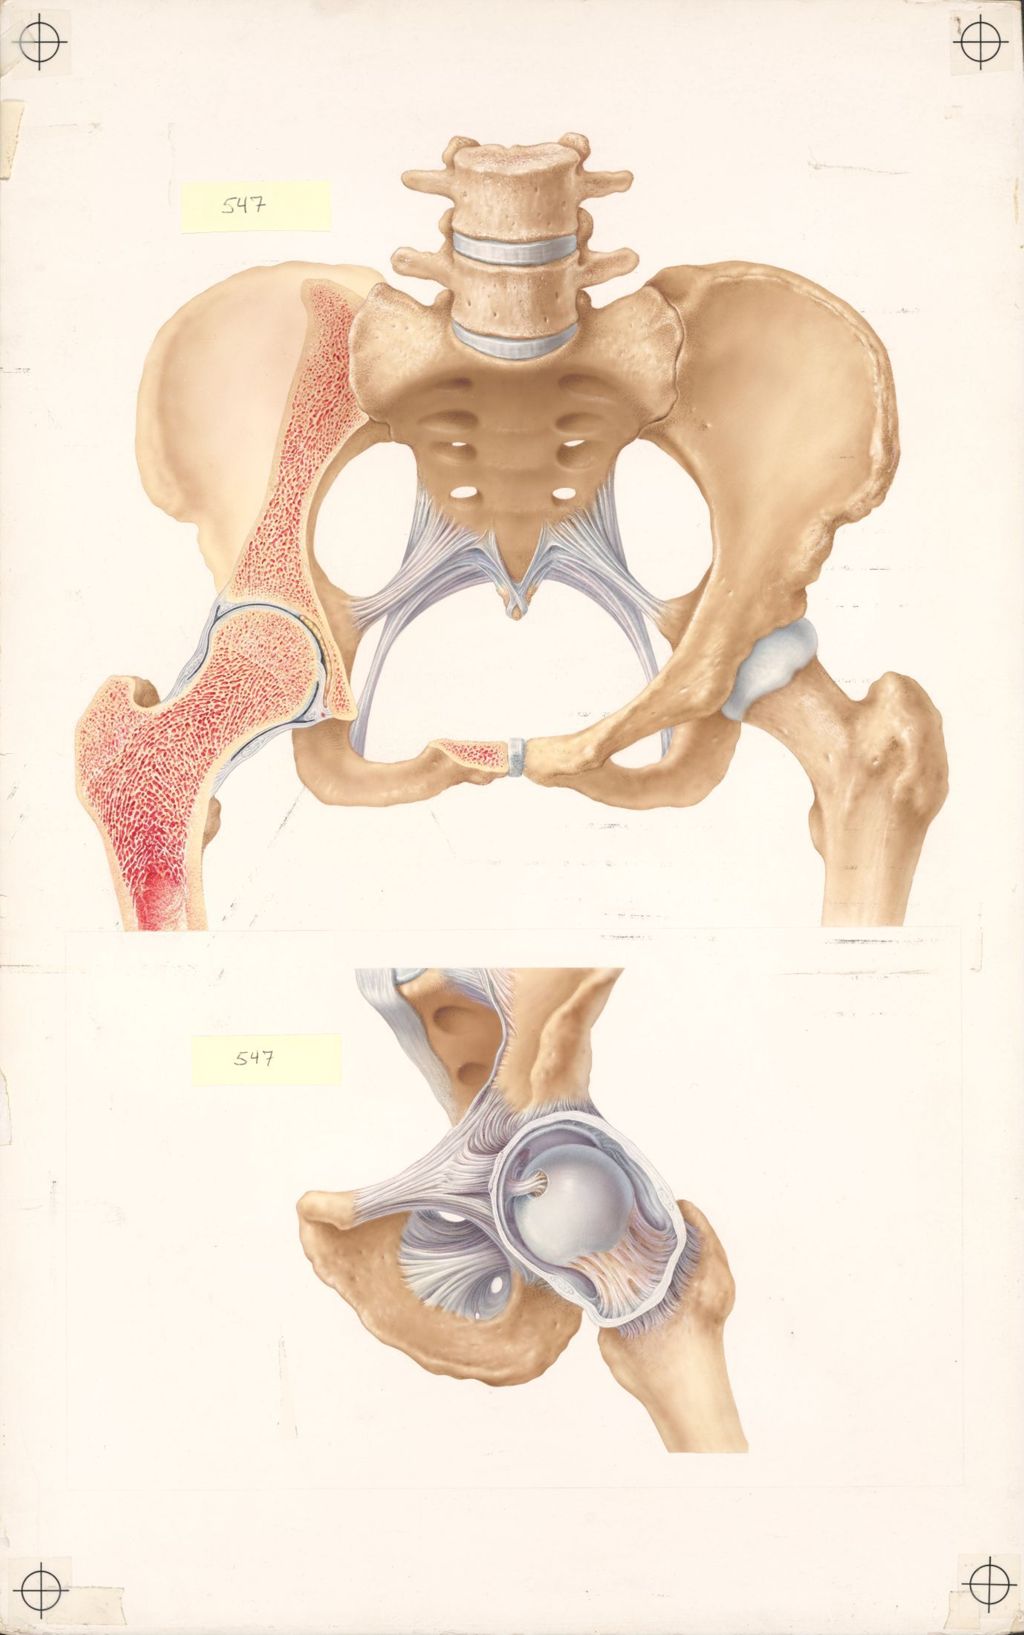 Miniature of Doctor-Patient Explanatory Atlas of Anatomy, Plate II, The Hip Joint Seen from the Anterior Aspect and in Art boardal Section